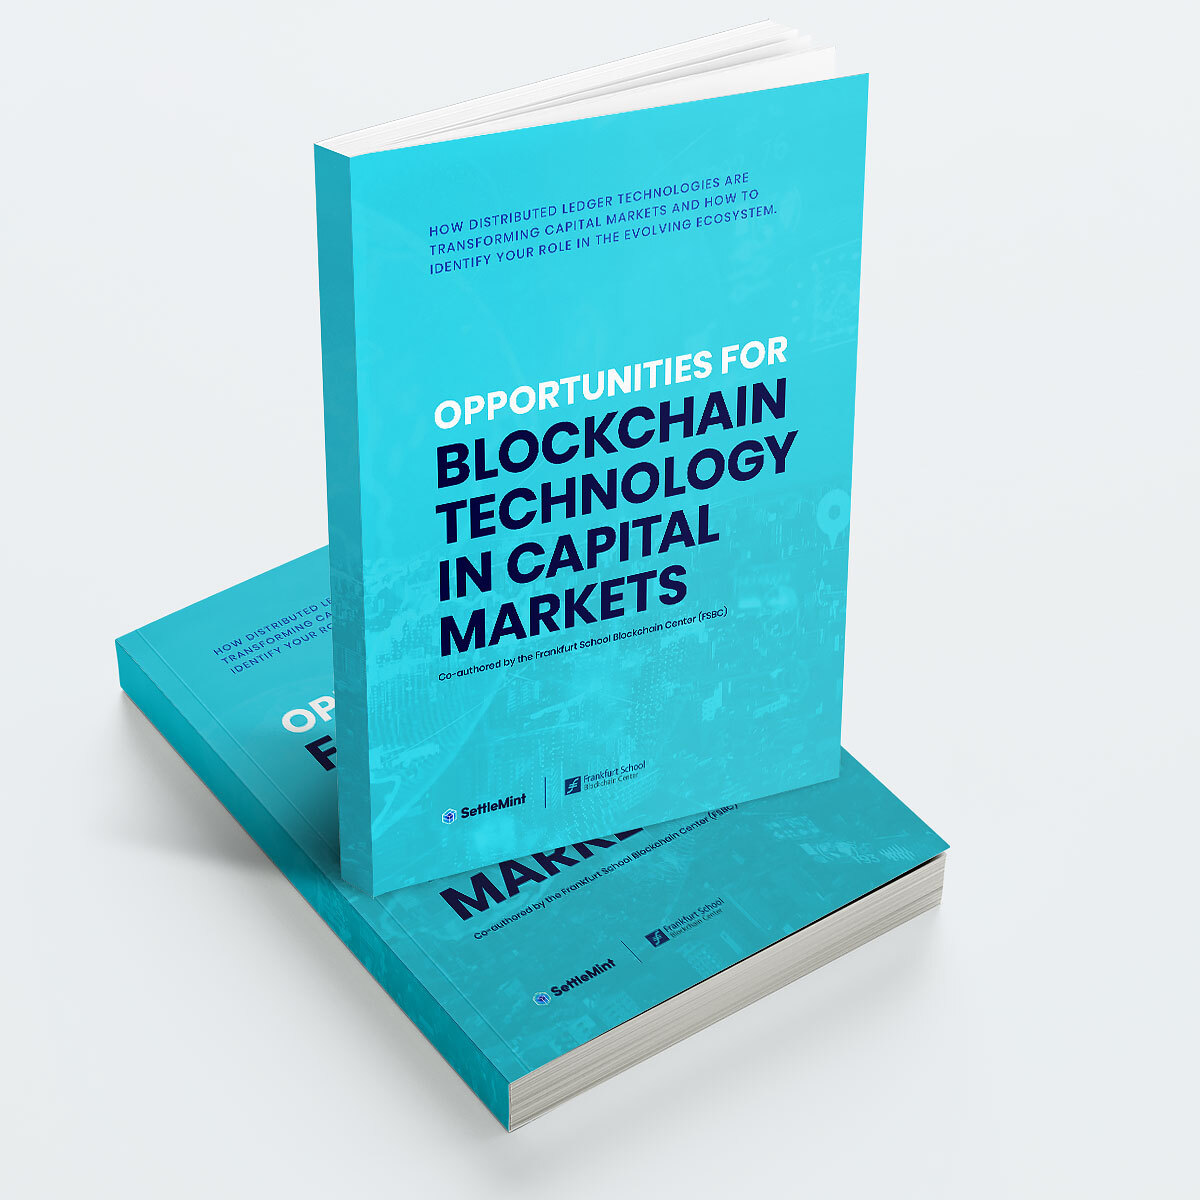 Download Free Minibook: Opportunities for Blockchain Technology in Capital Markets